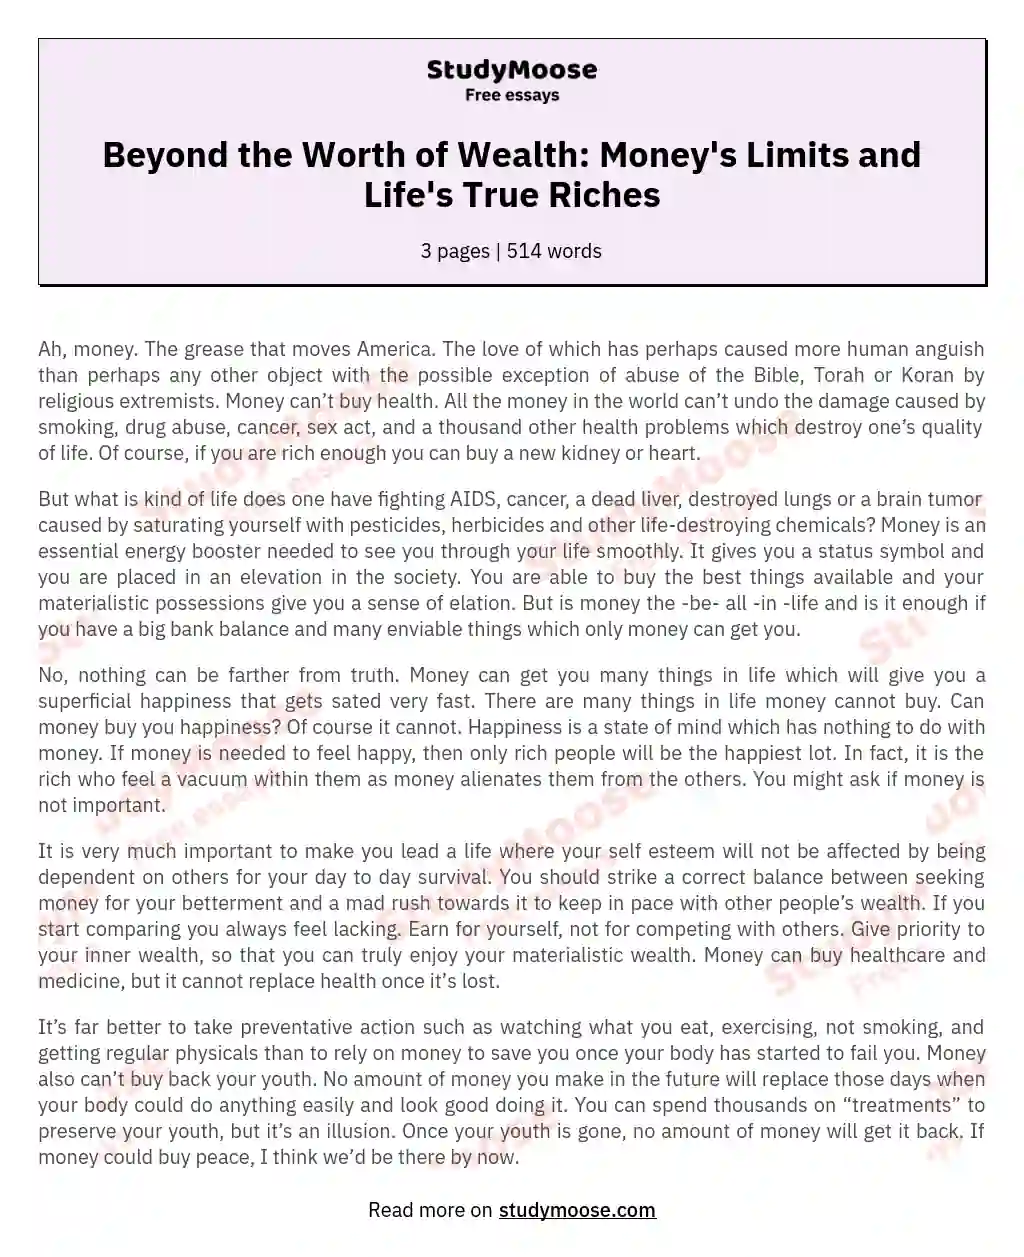 Beyond the Worth of Wealth: Money's Limits and Life's True Riches essay